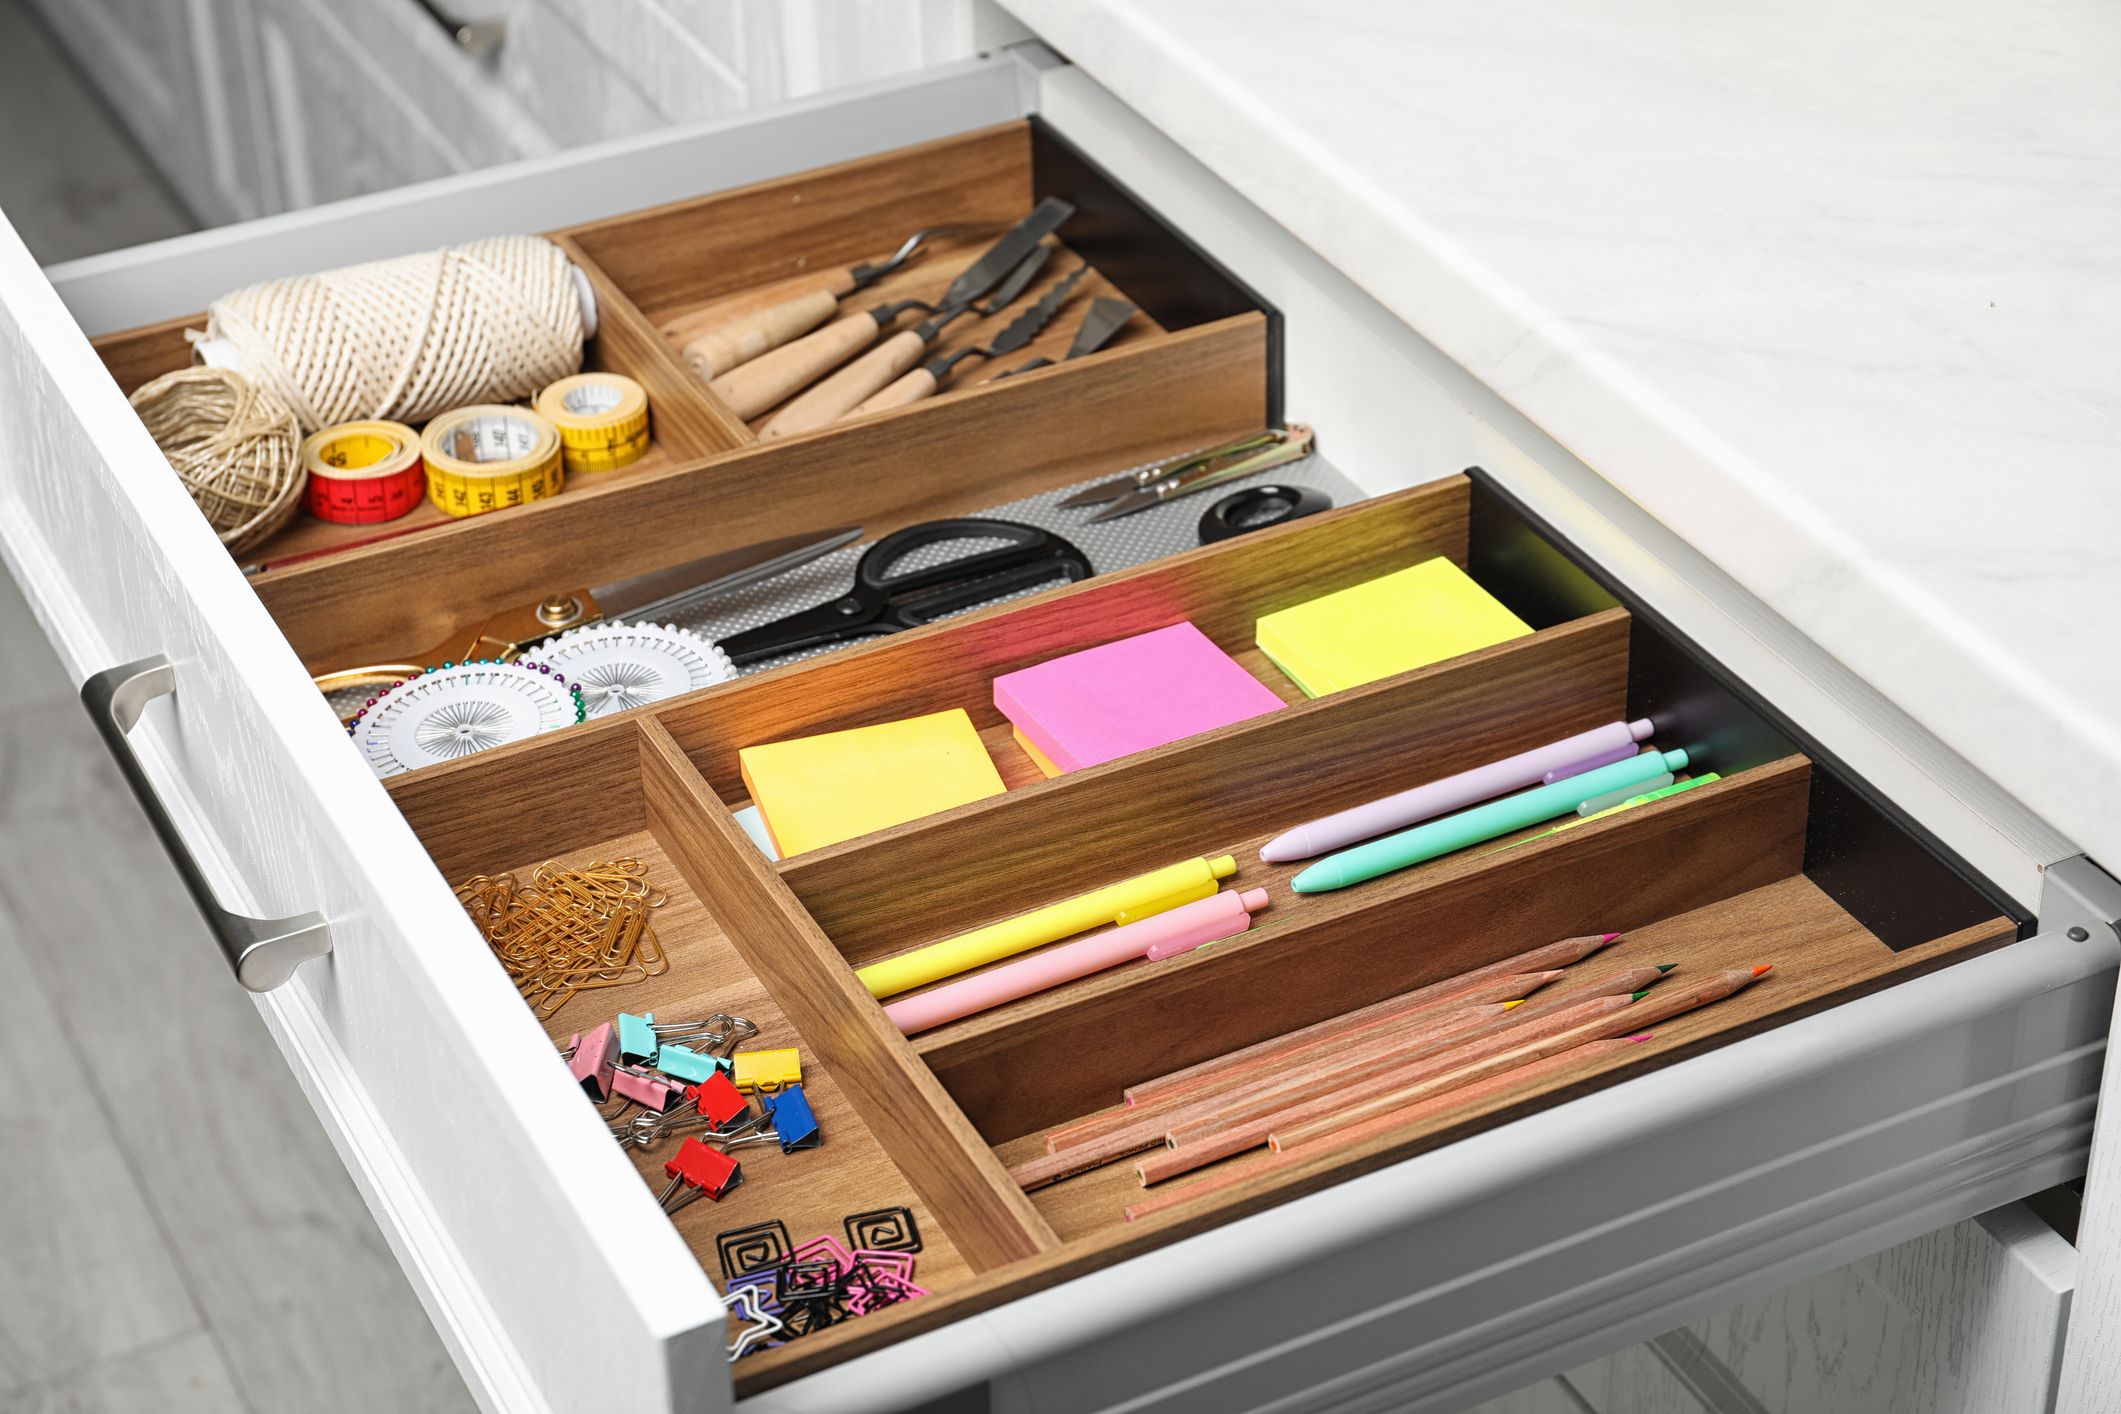 16 Sneaky places to add more kitchen storage – SheKnows